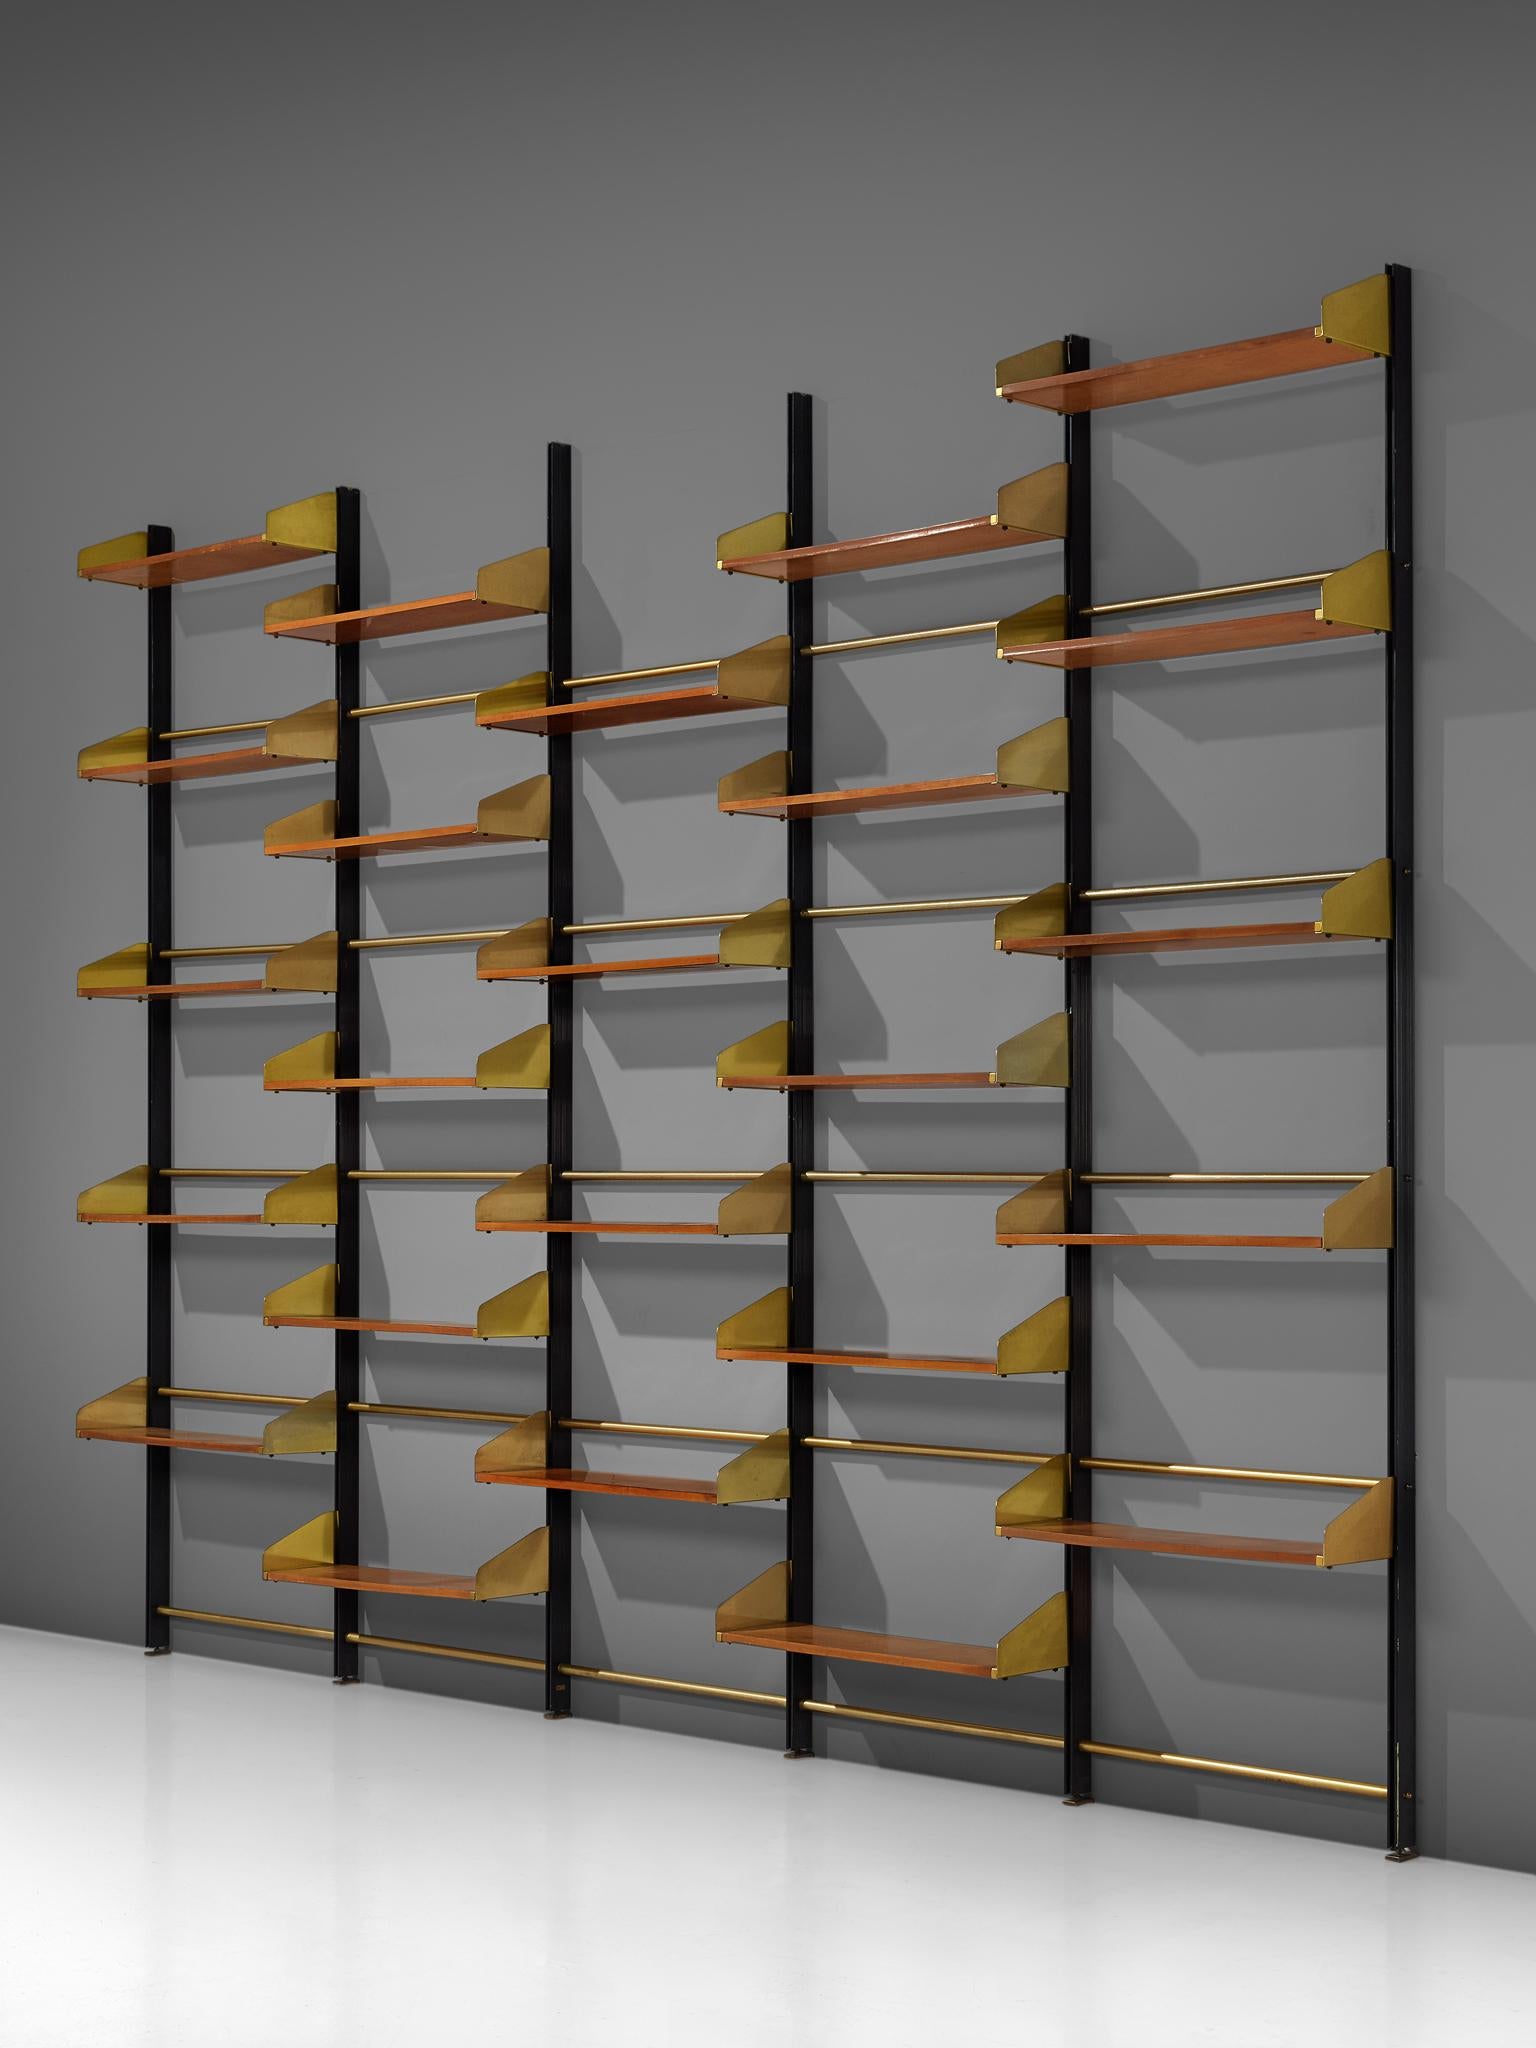 Feal, wall unit, teak brass and brassed aluminum, Italy, 1950s. 

This eloquent wall unit from Italy is made with a brassed aluminum frame and connective joints and plenty of teak shelves. The combination of the brass and teak is both modest and